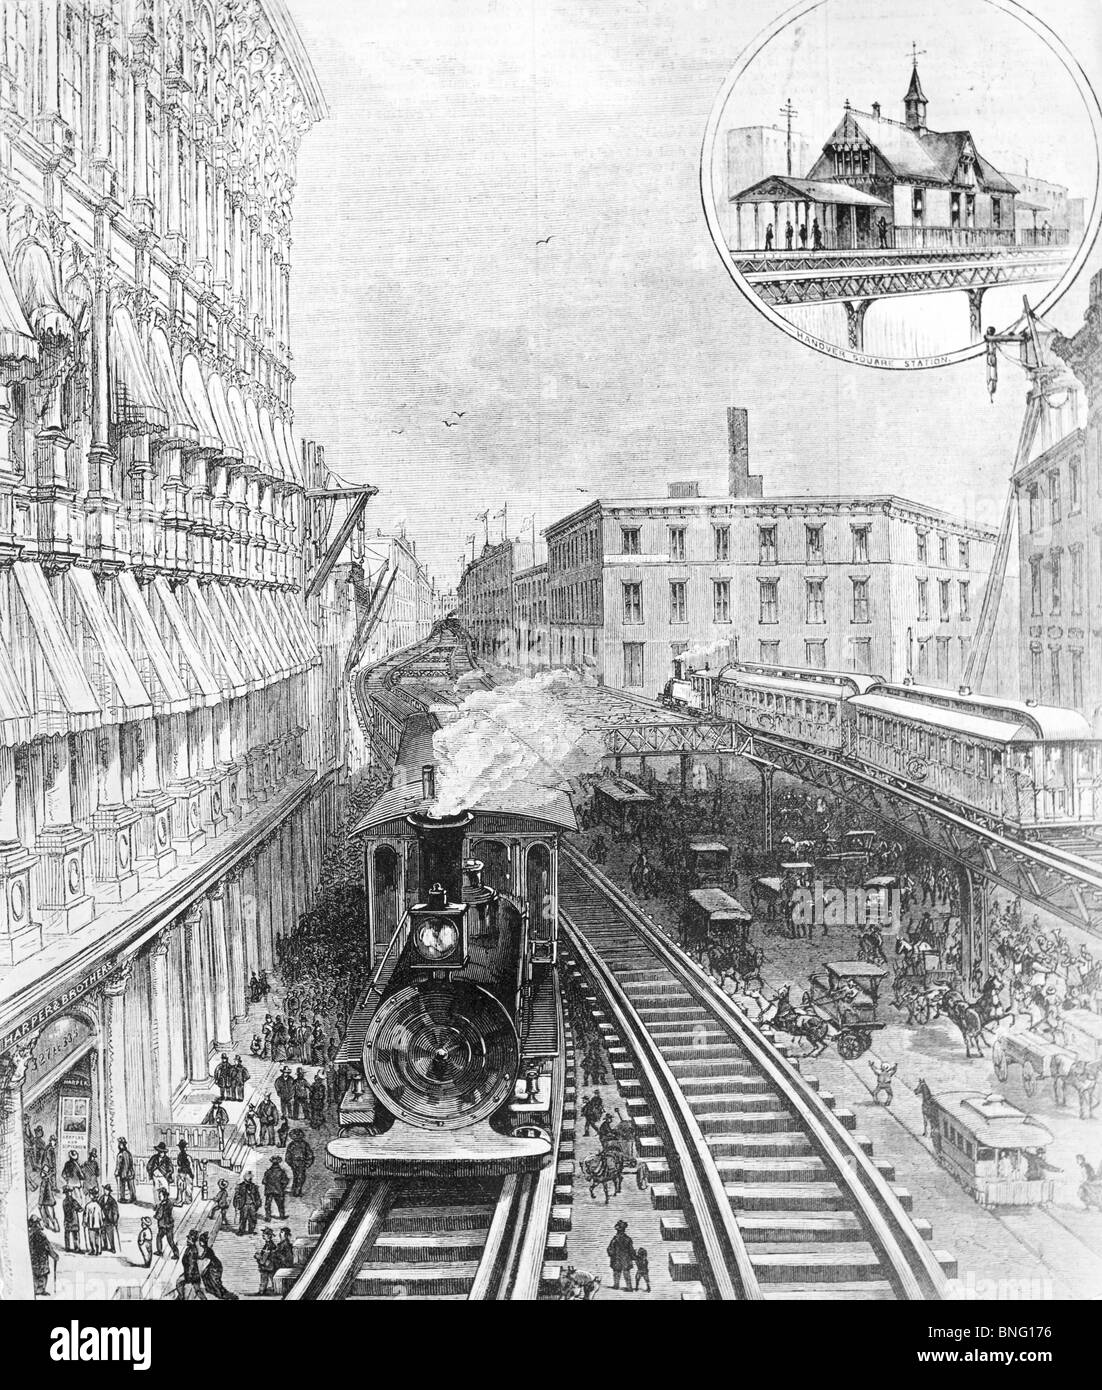 The First Steam-Driven L Trains Passing over Franklin Square by unknown artist, print, 1878 Stock Photo